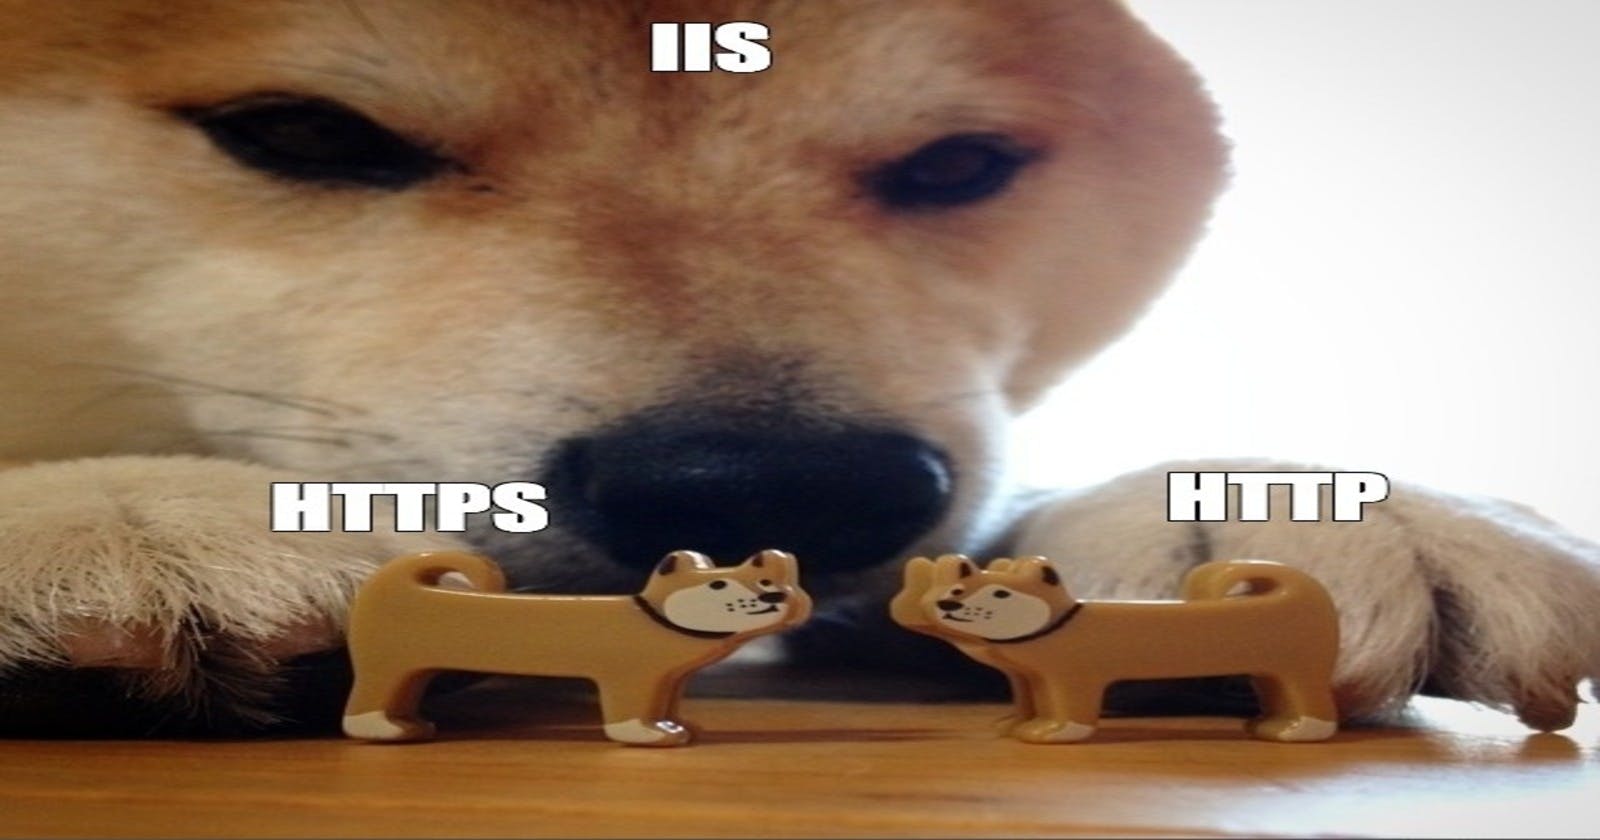 HTTPS rather then HTTP